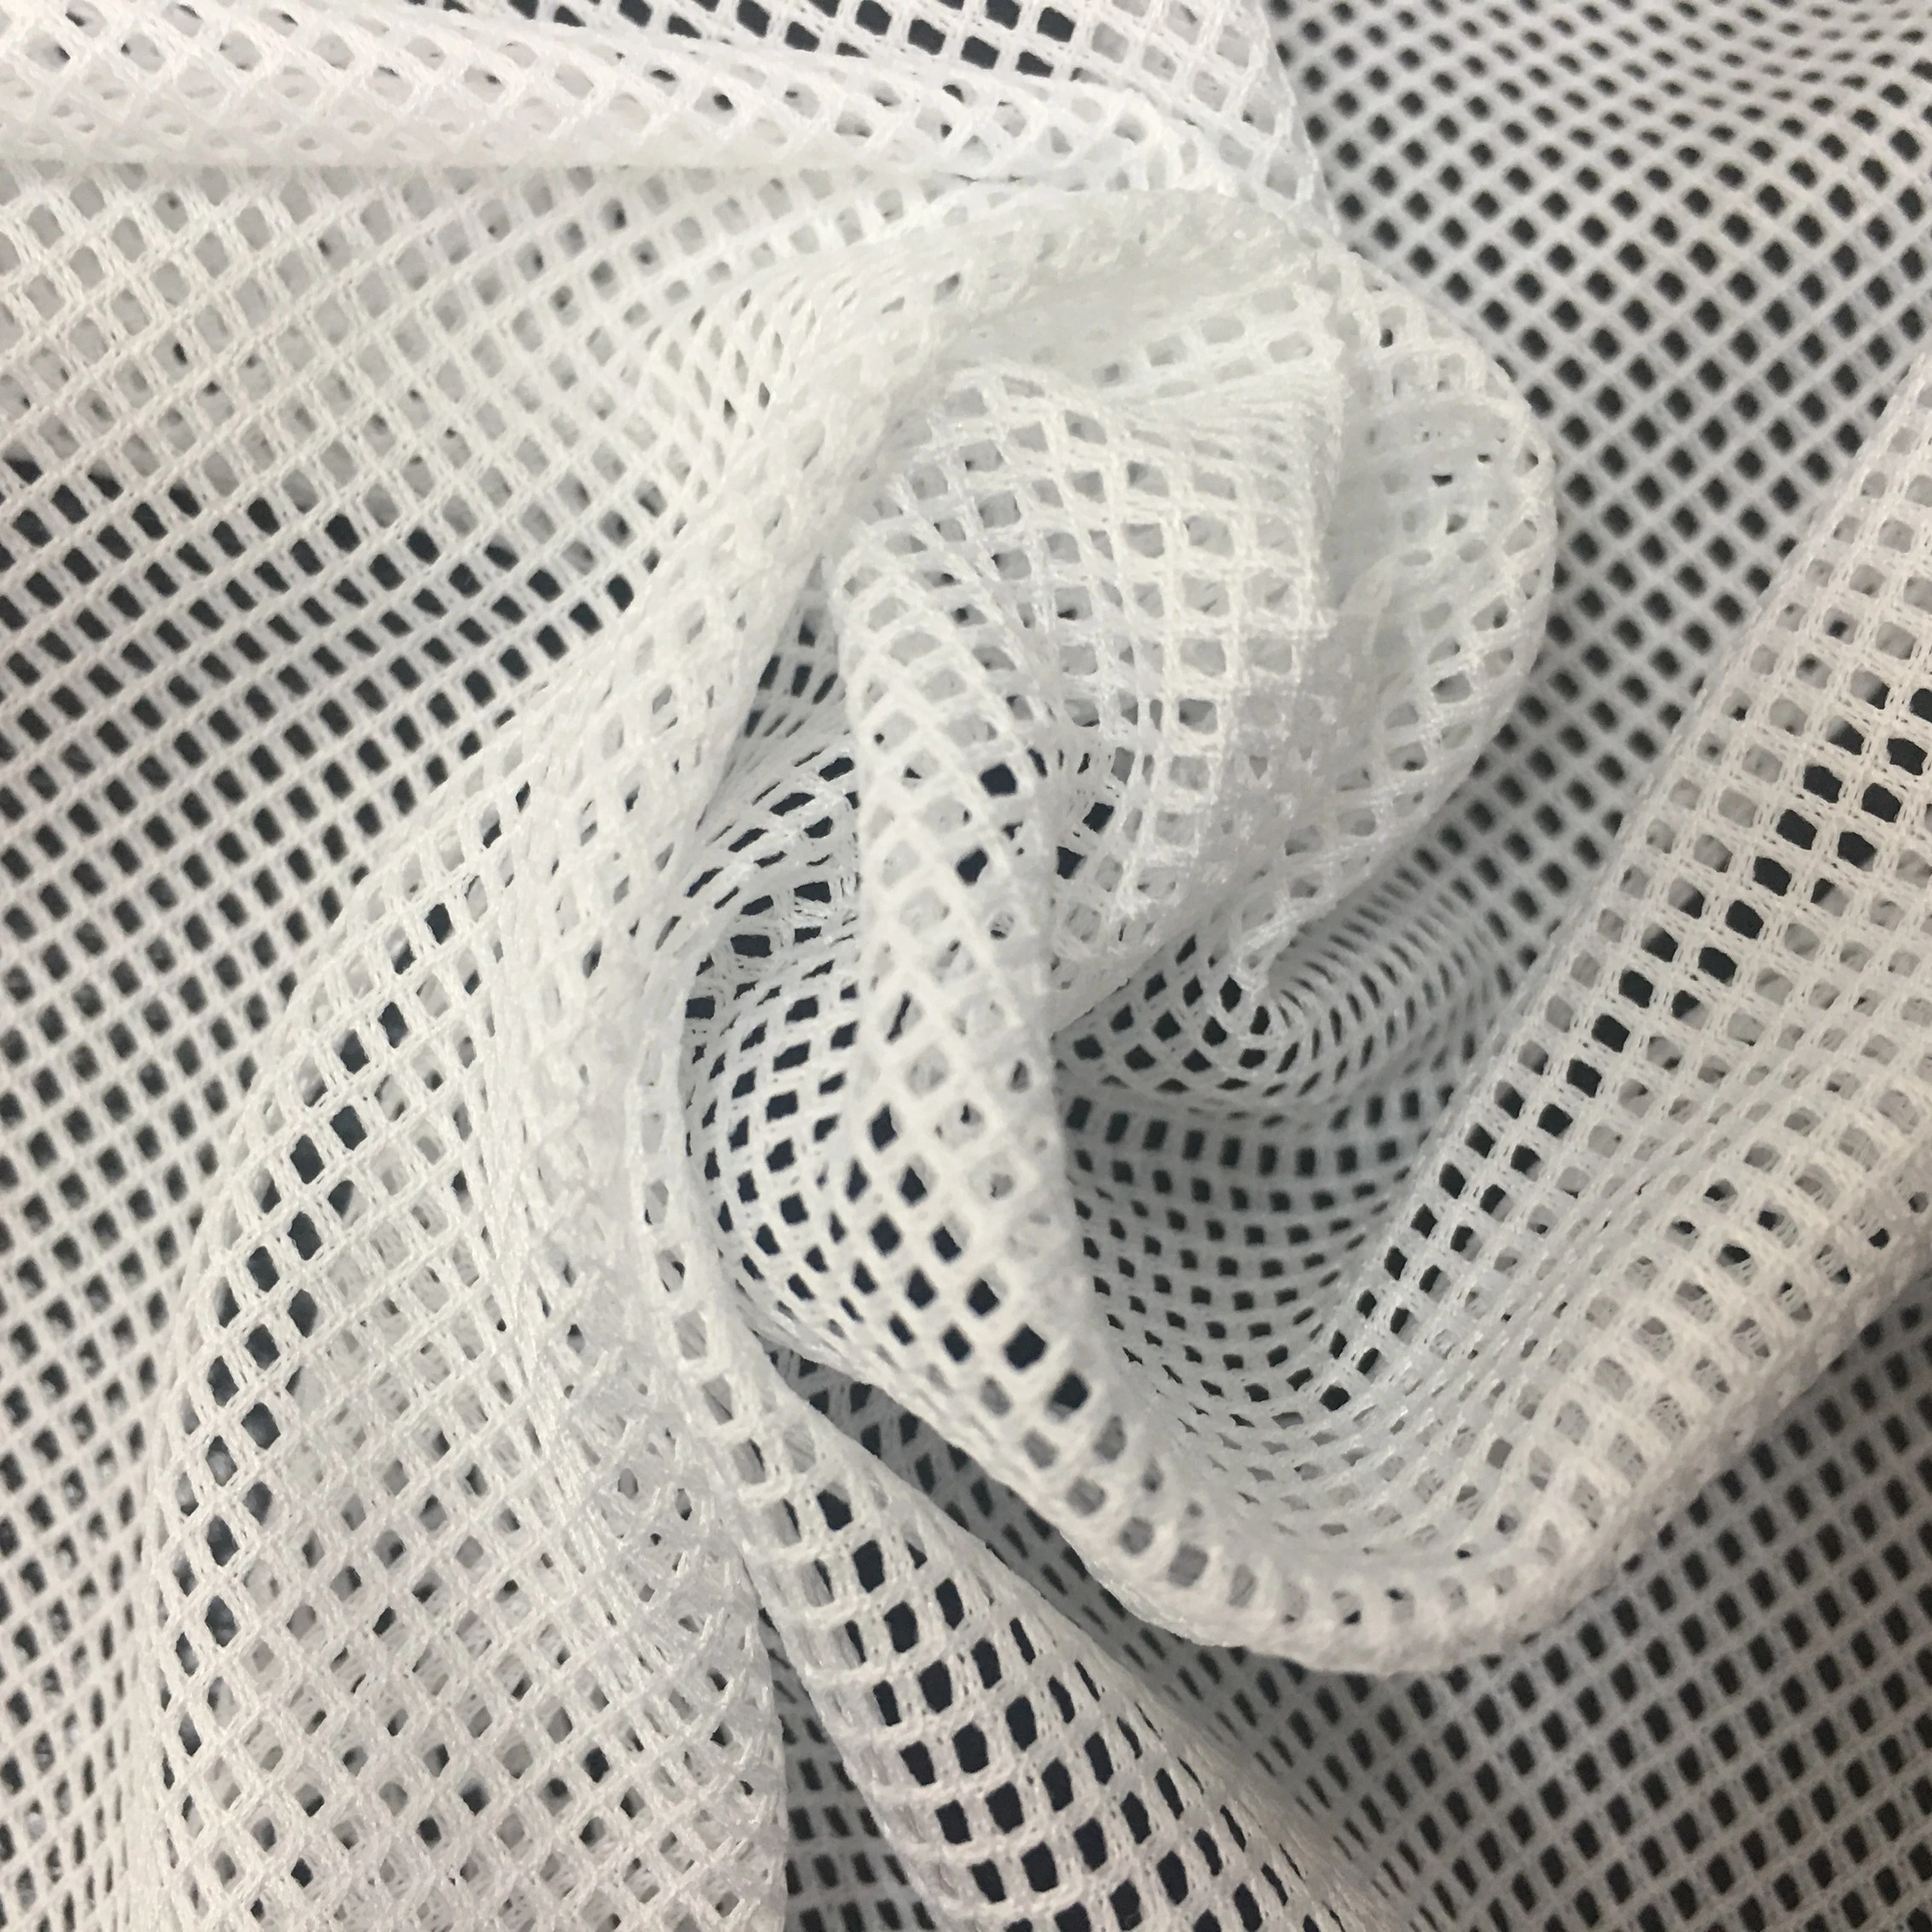 Breathable stretchy sports net knitting mesh fabric